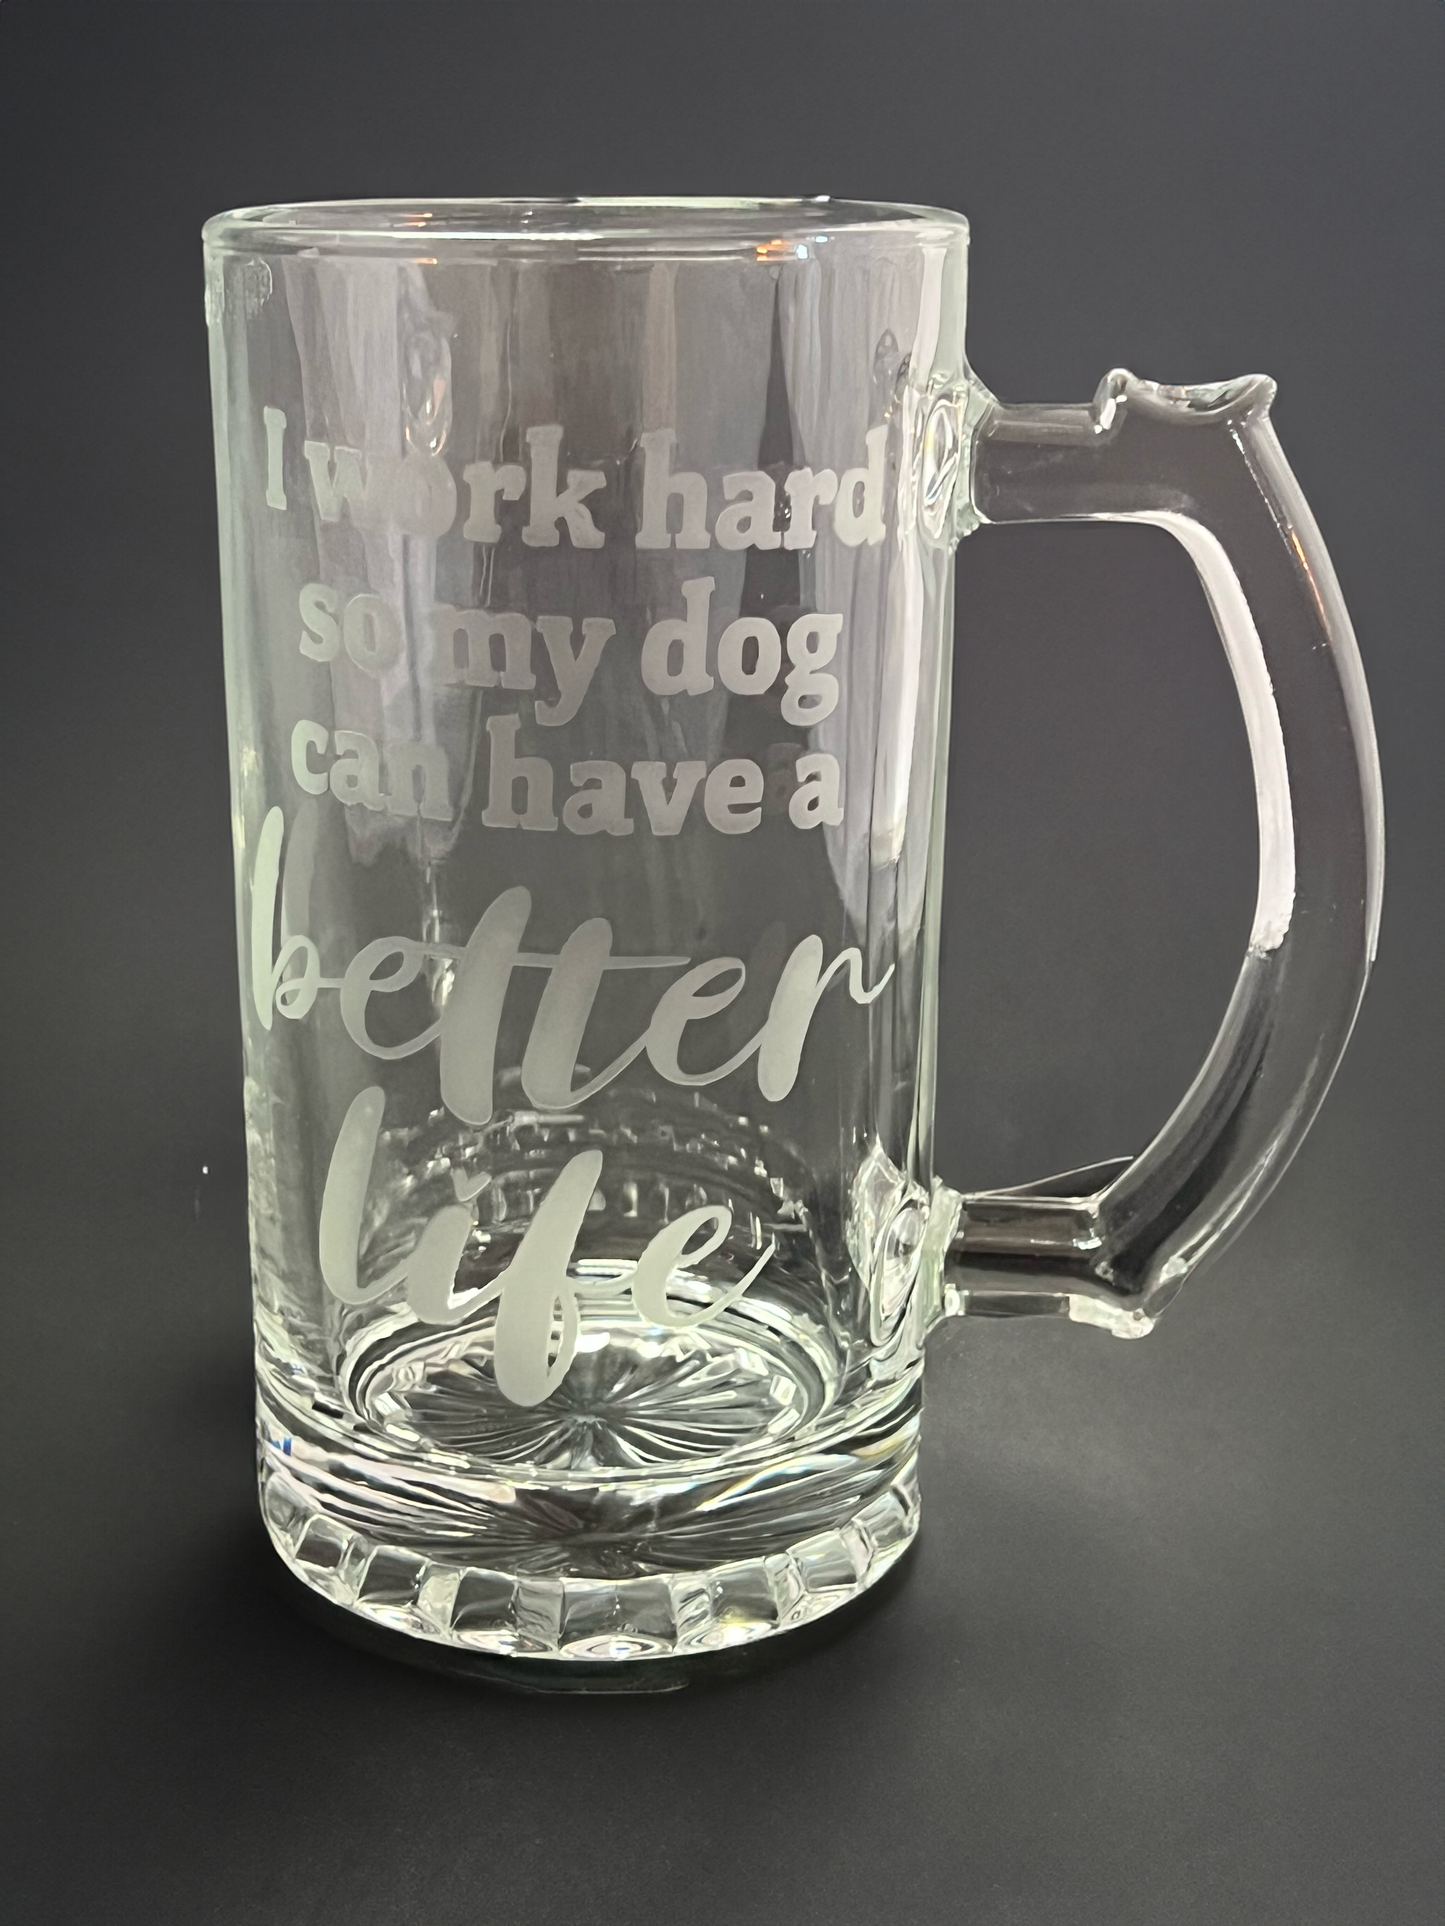 I Work Hord So My Dog Can Have a Better Life | Beer Stein | Beer Bug | Etched Glass | Glassware